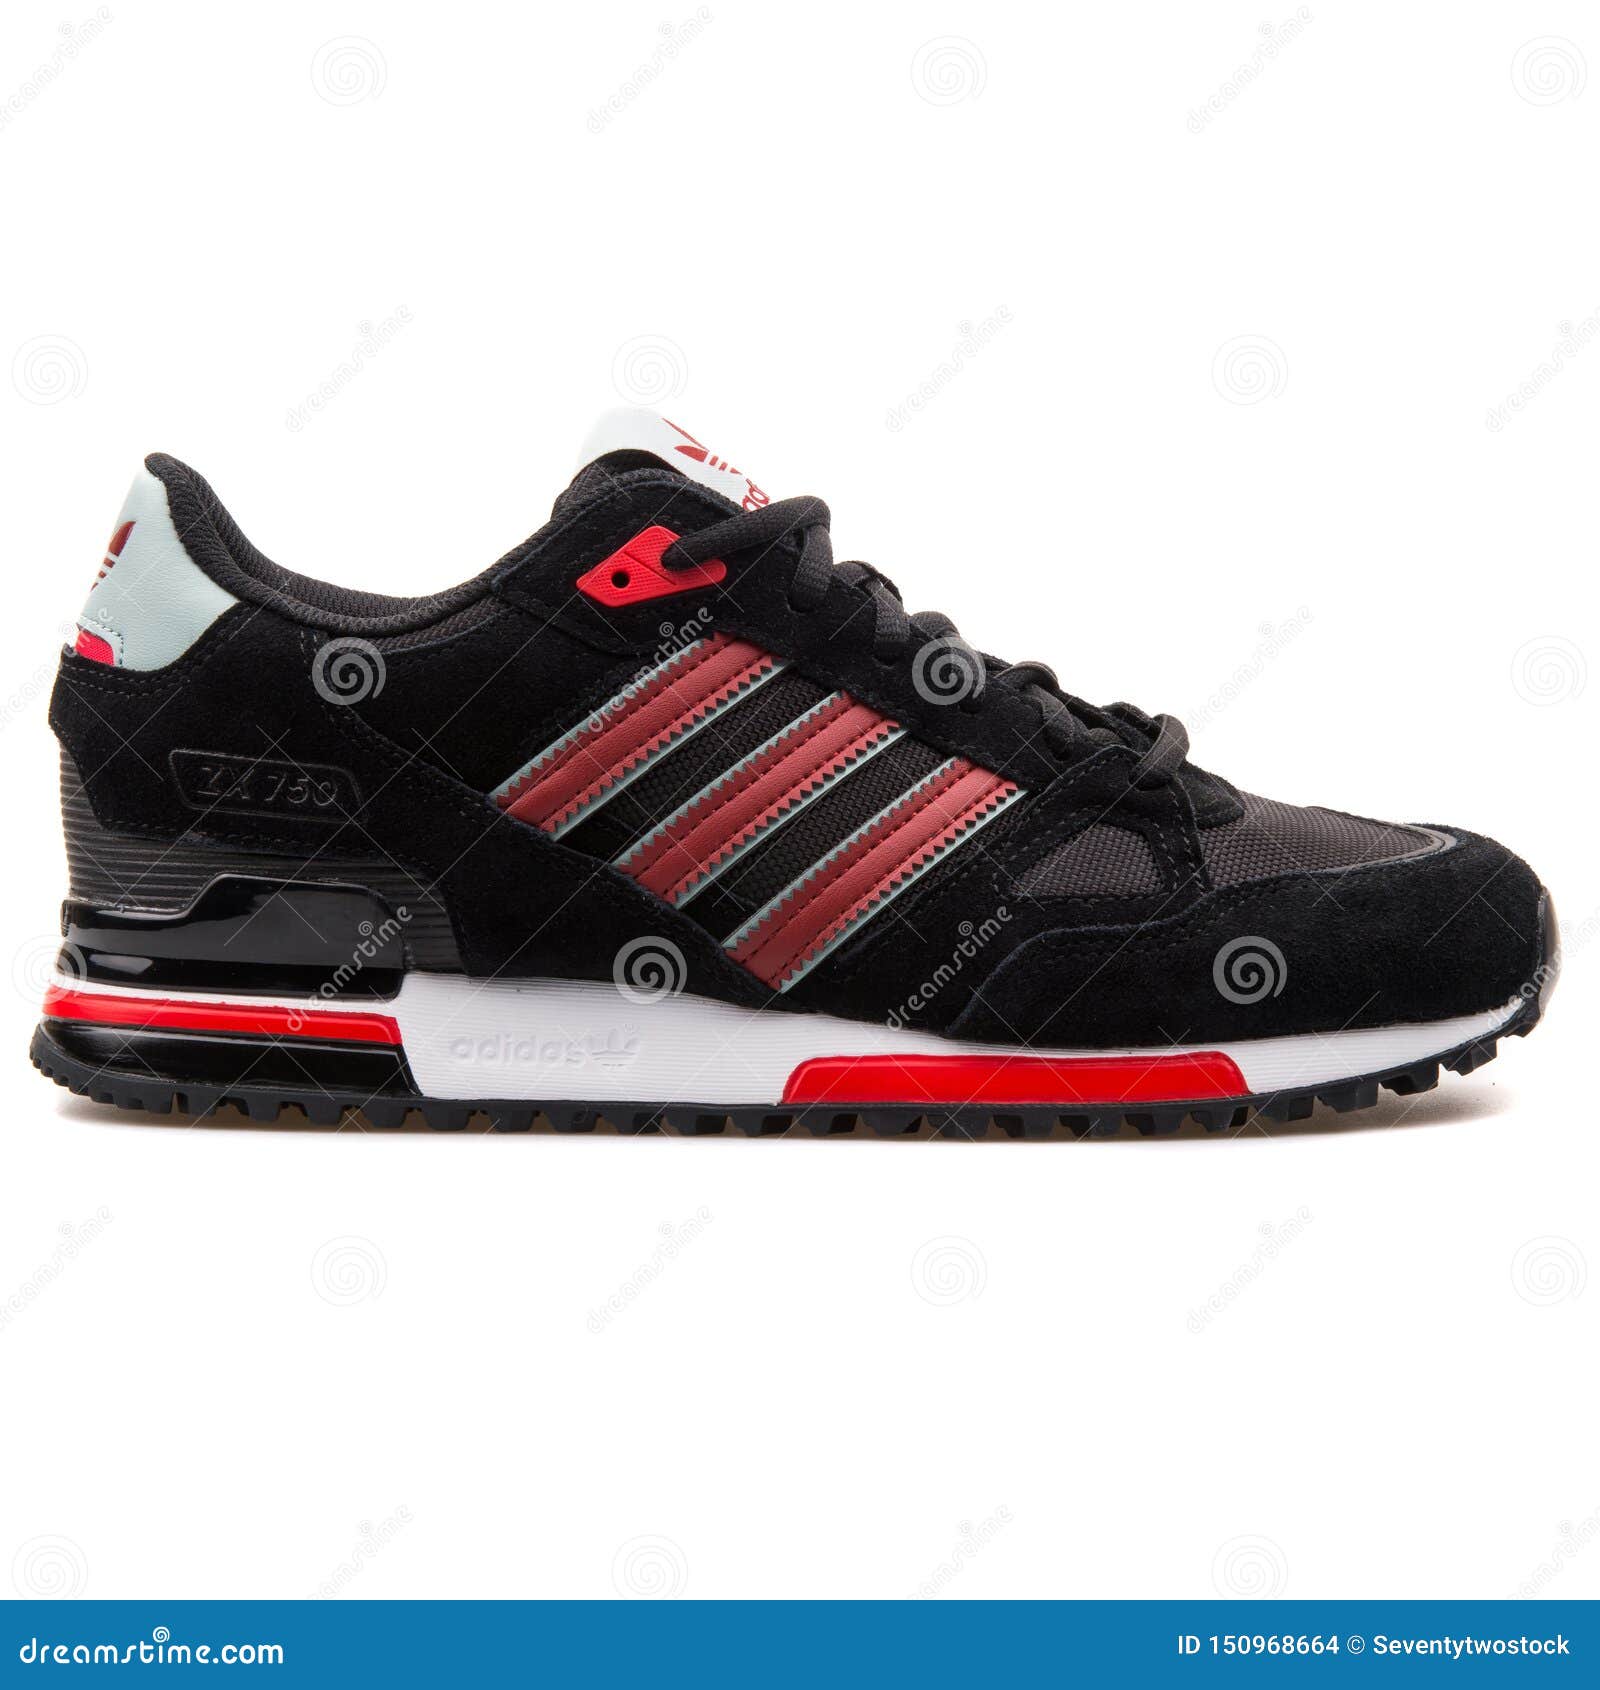 Adidas ZX 750 and Red Sneaker Editorial Stock Image - Image sneakers, athletic: 150968664